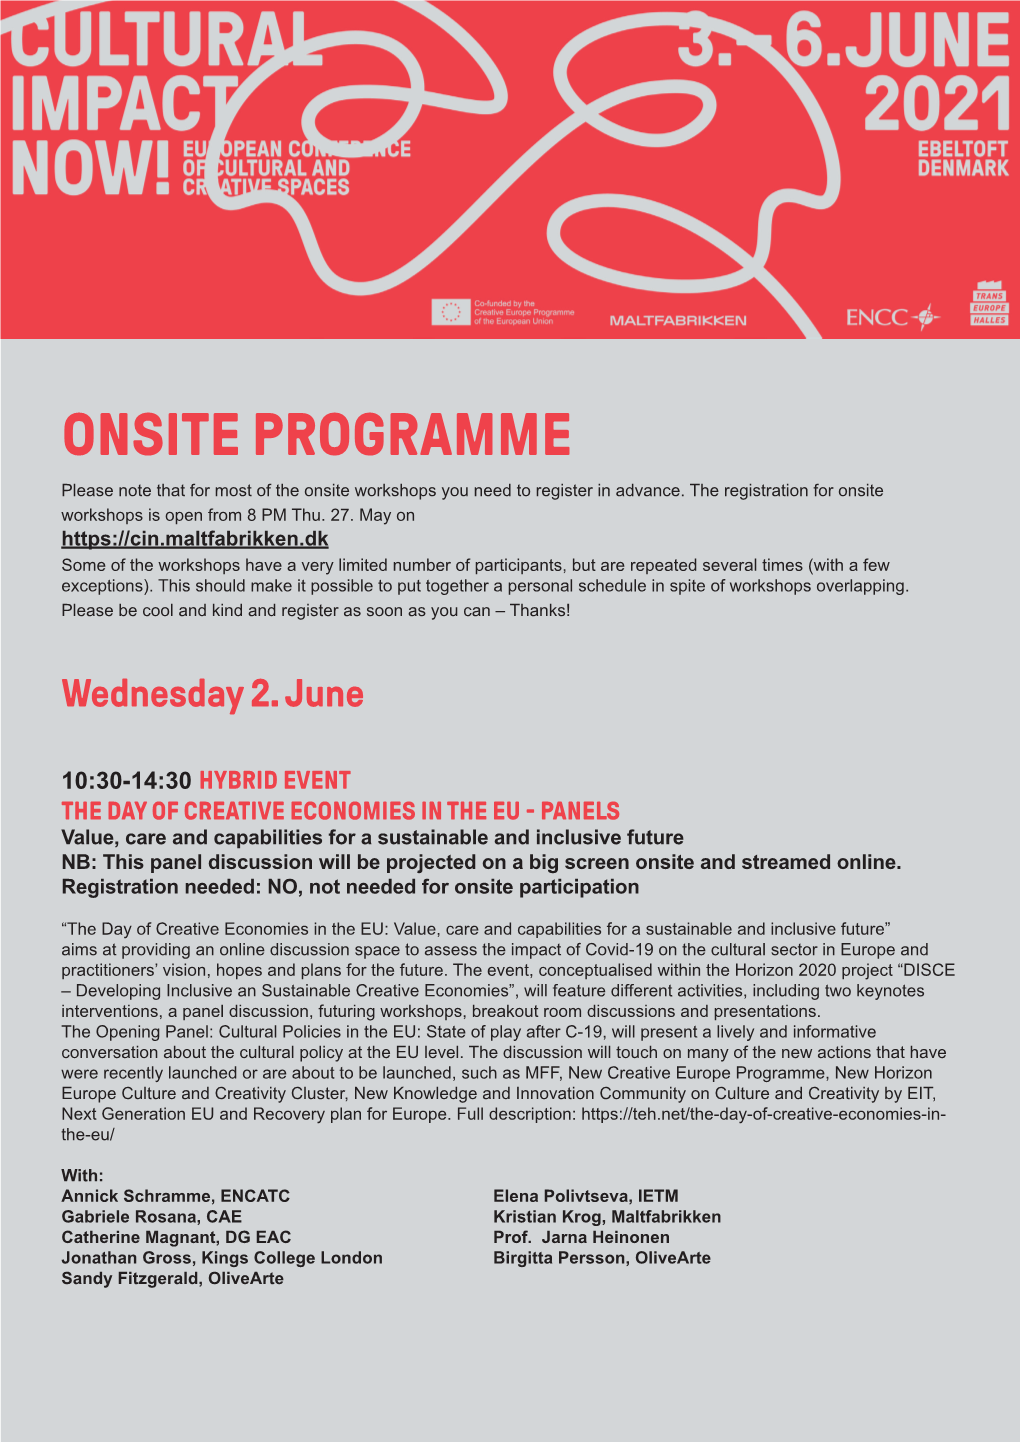 ONSITE PROGRAMME Please Note That for Most of the Onsite Workshops You Need to Register in Advance